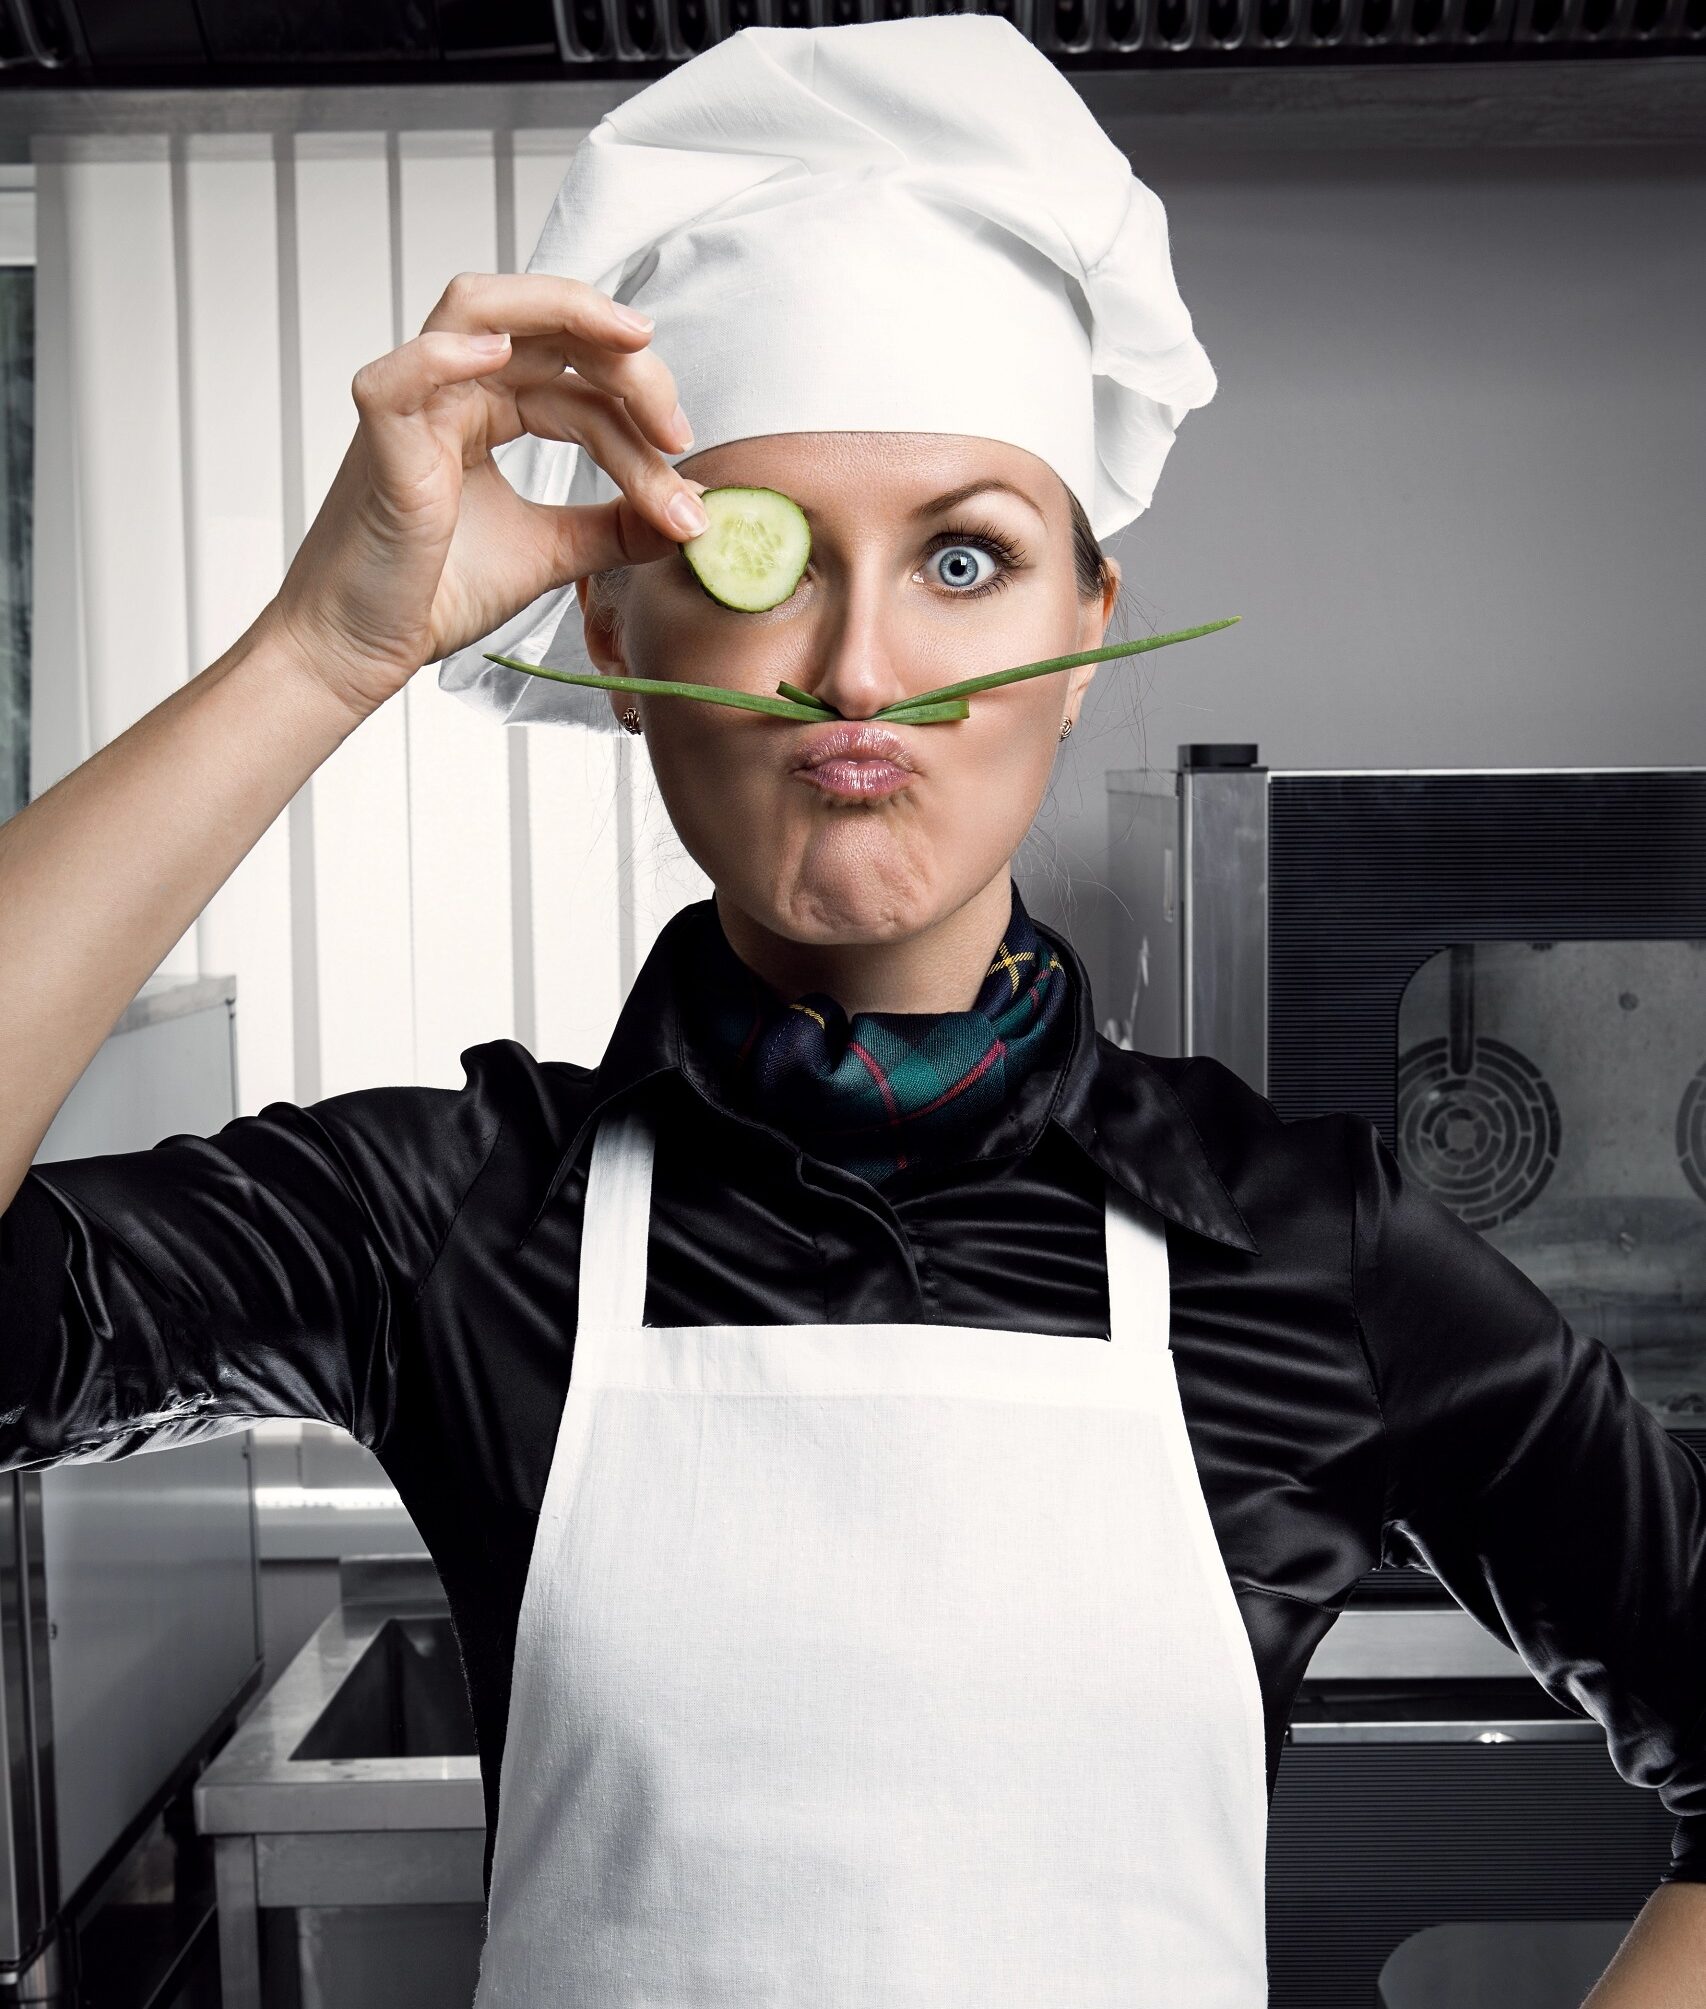 Pretty female wearing a white chef's apron and hat with a black shirt underneath posing with one hand on the hip and the other holding a sliced cucumber to her eye with her forefingers and an asparagus held up between her upper lip and nose as if a moustache, depicting her silly good nature, with a commercial kitchen in the background.